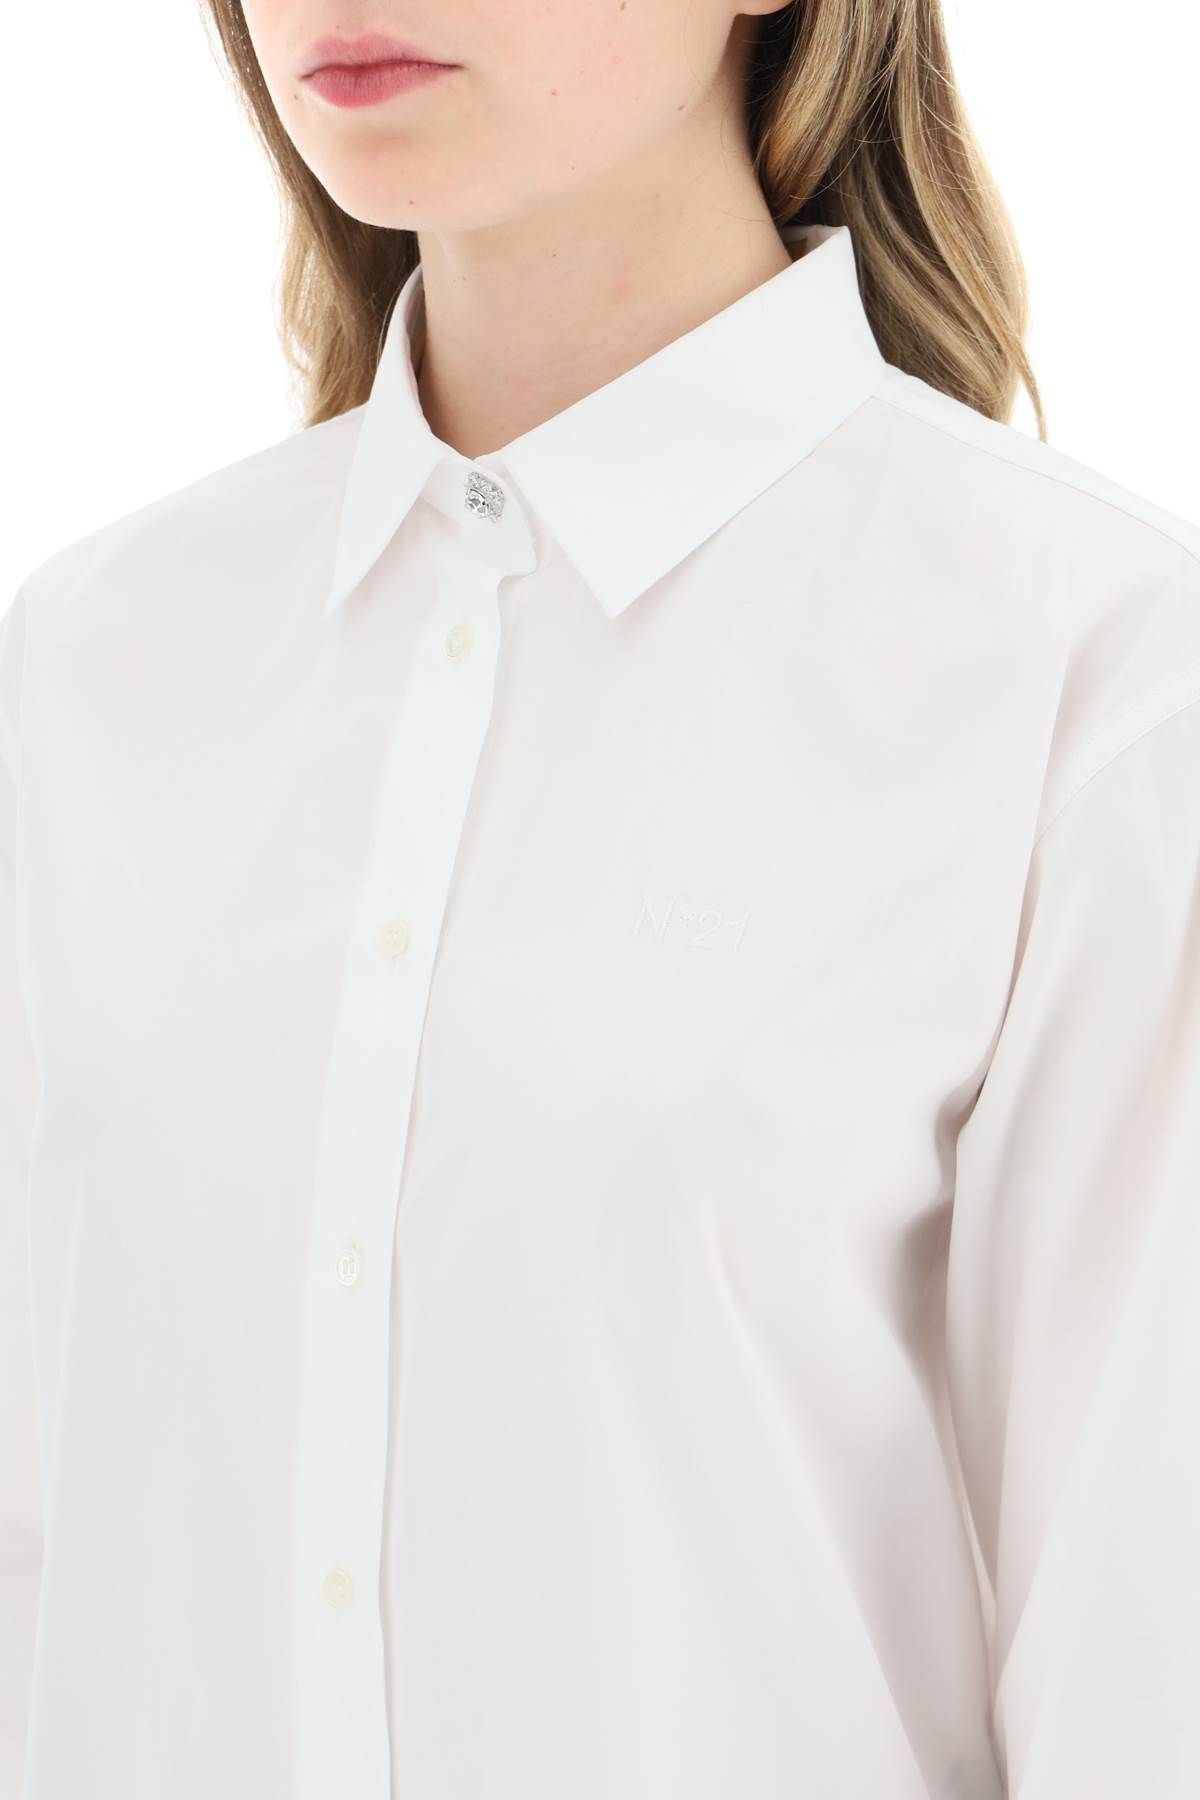 Shop N°21 Shirt With Jewel Buttons In White